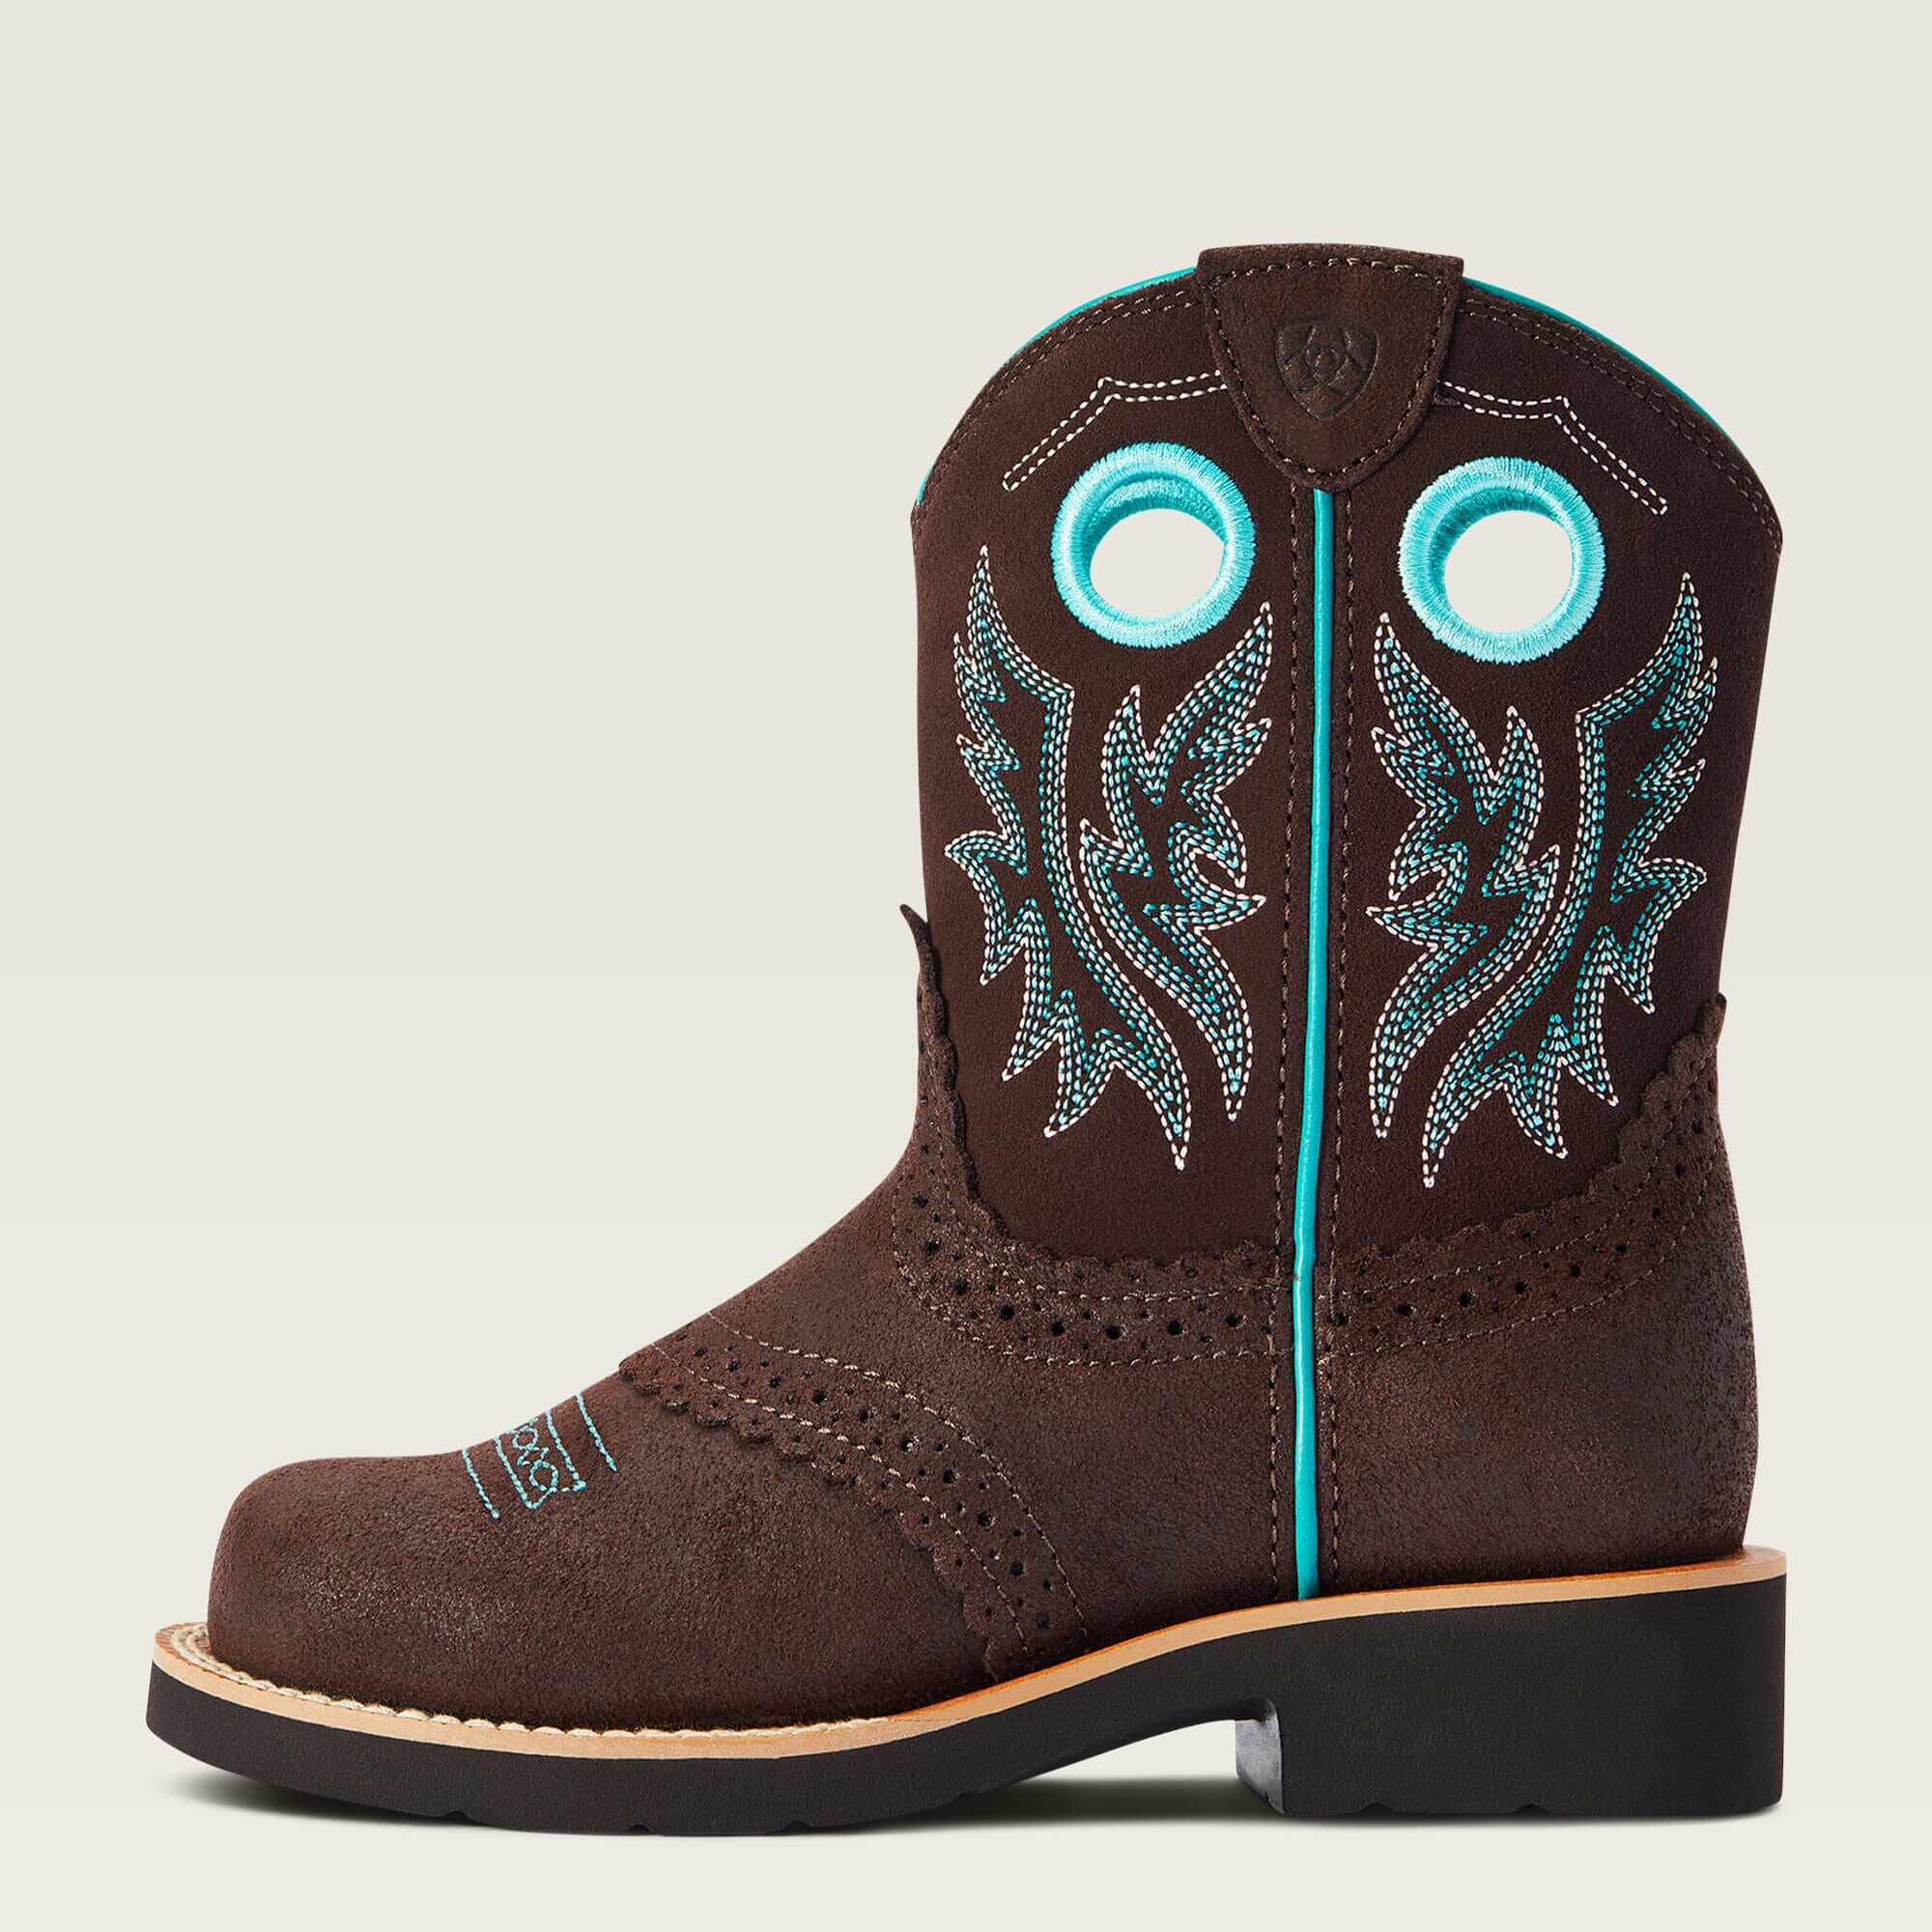 Kid's-Ariat – Go Boot Country